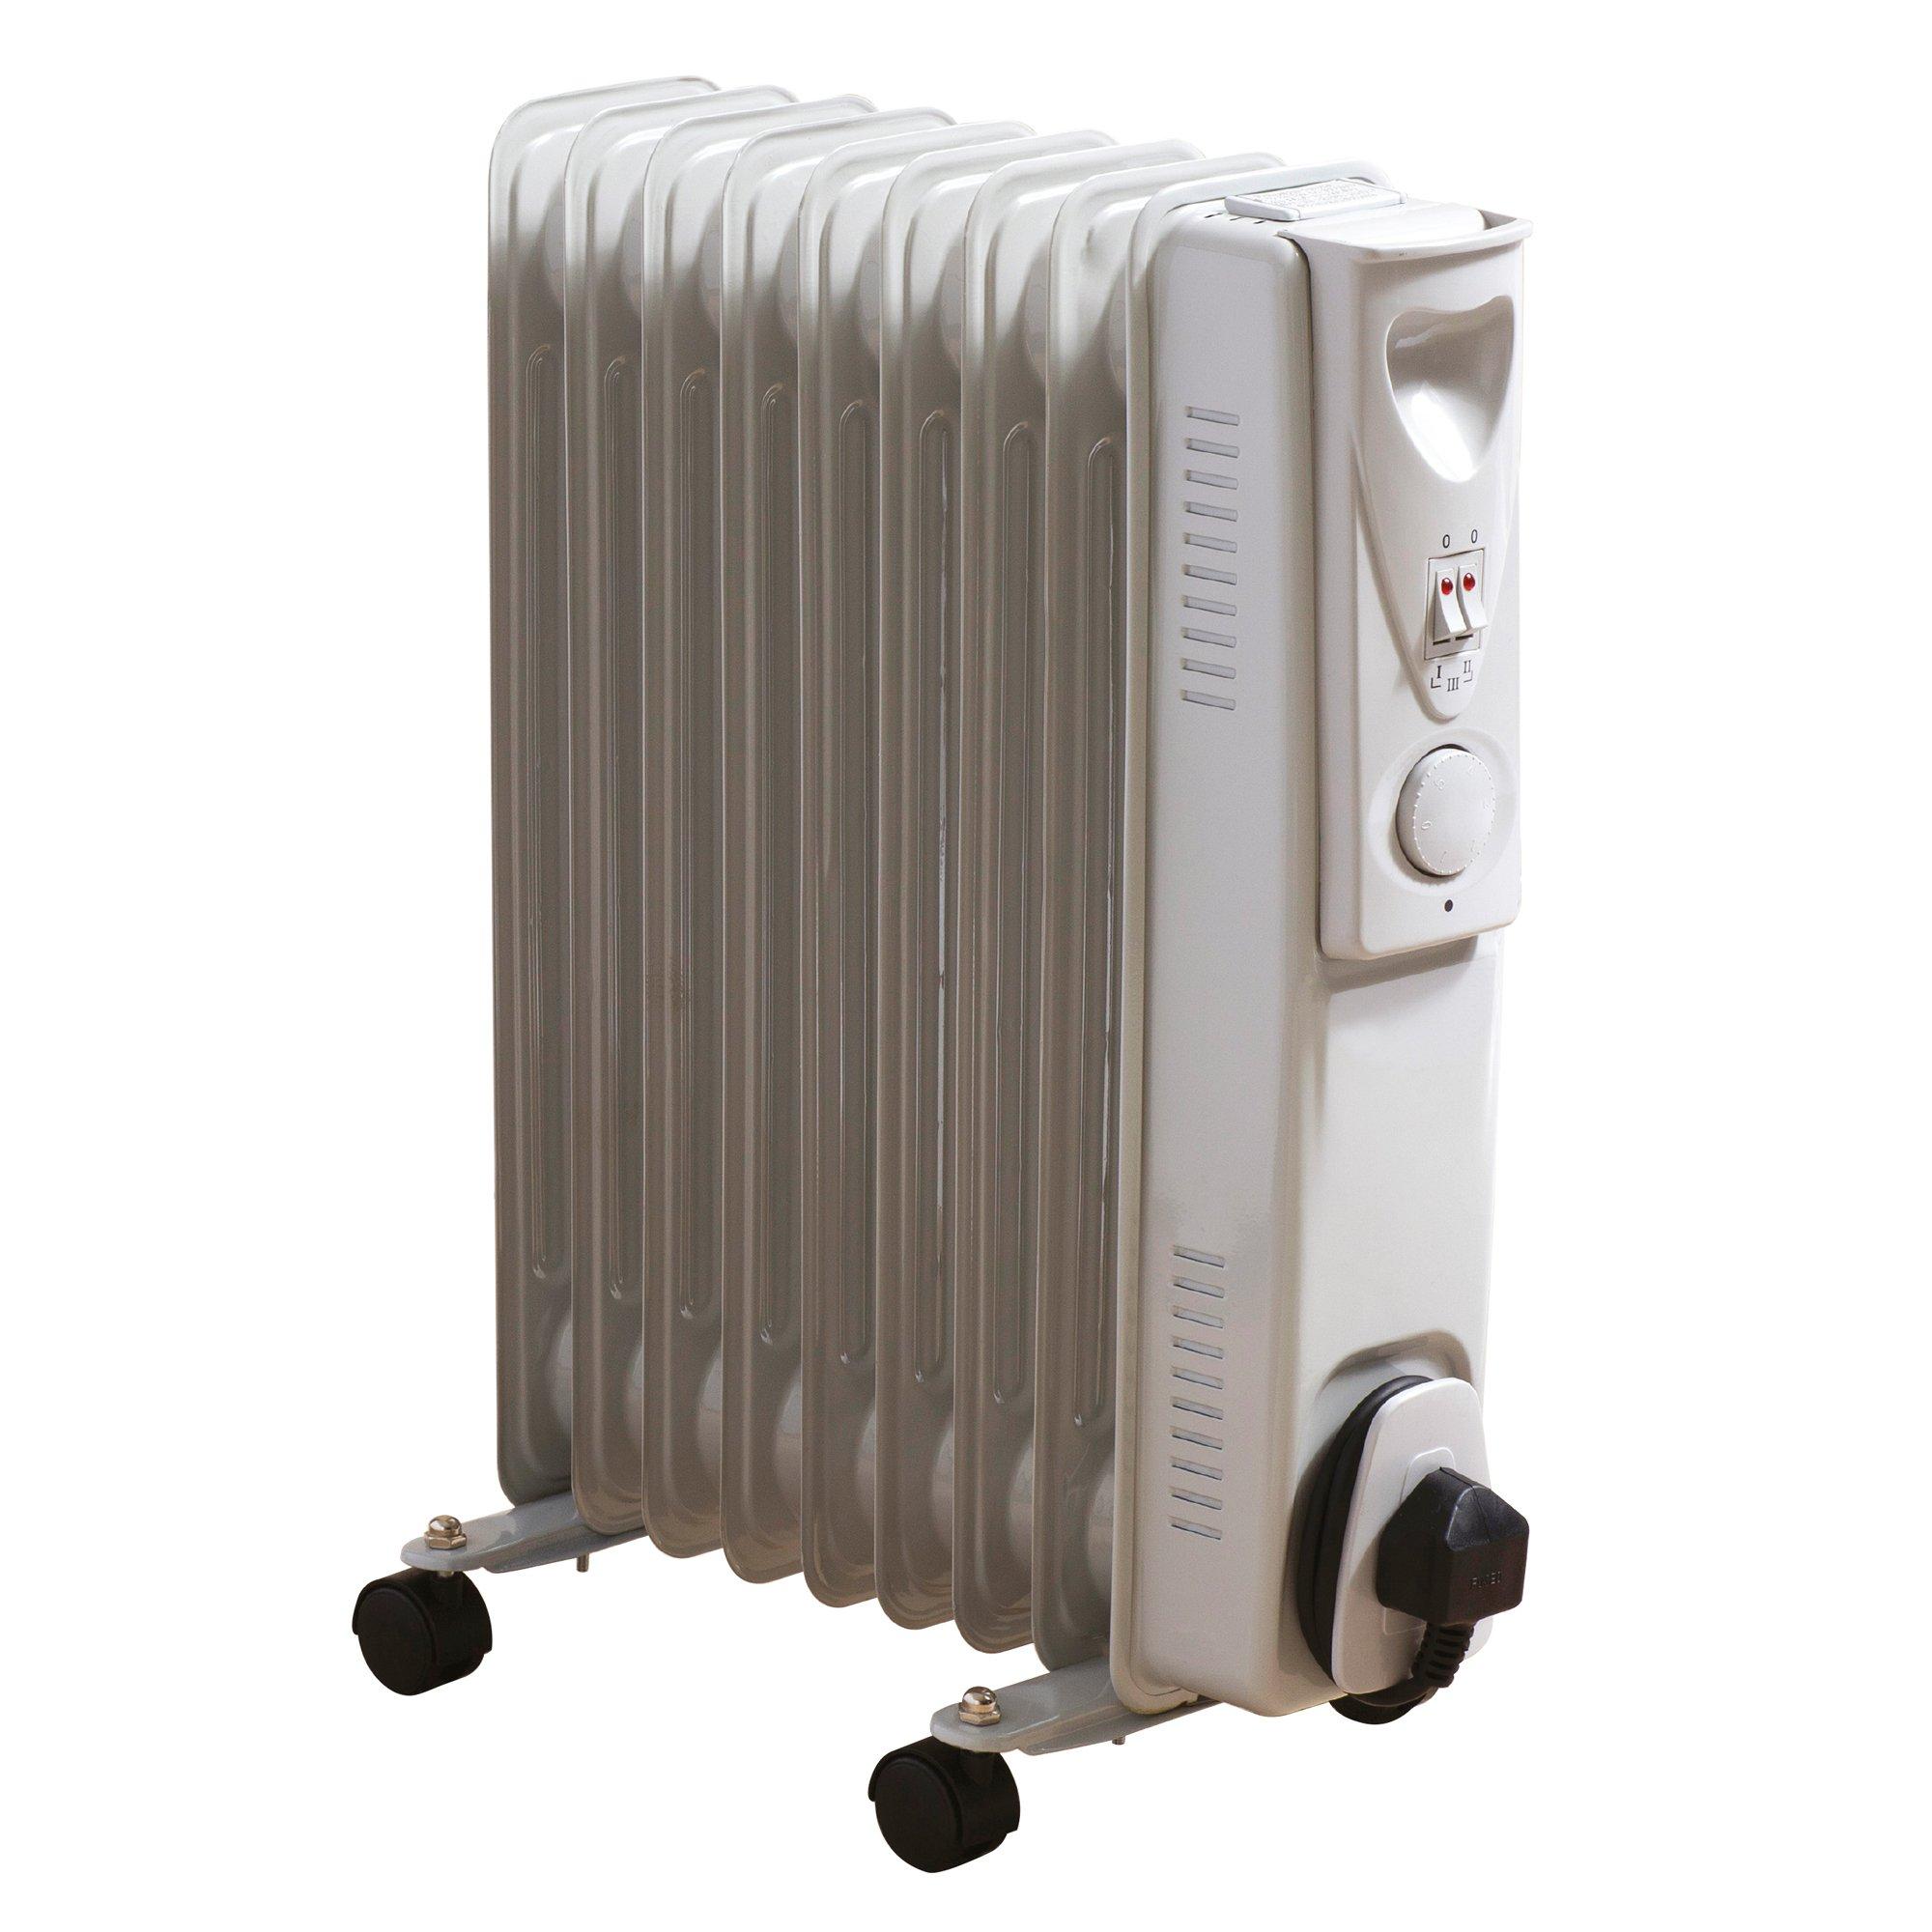 9 Fin Oil Filled Radiator 2000W Portable with Adjustable Thermostat White